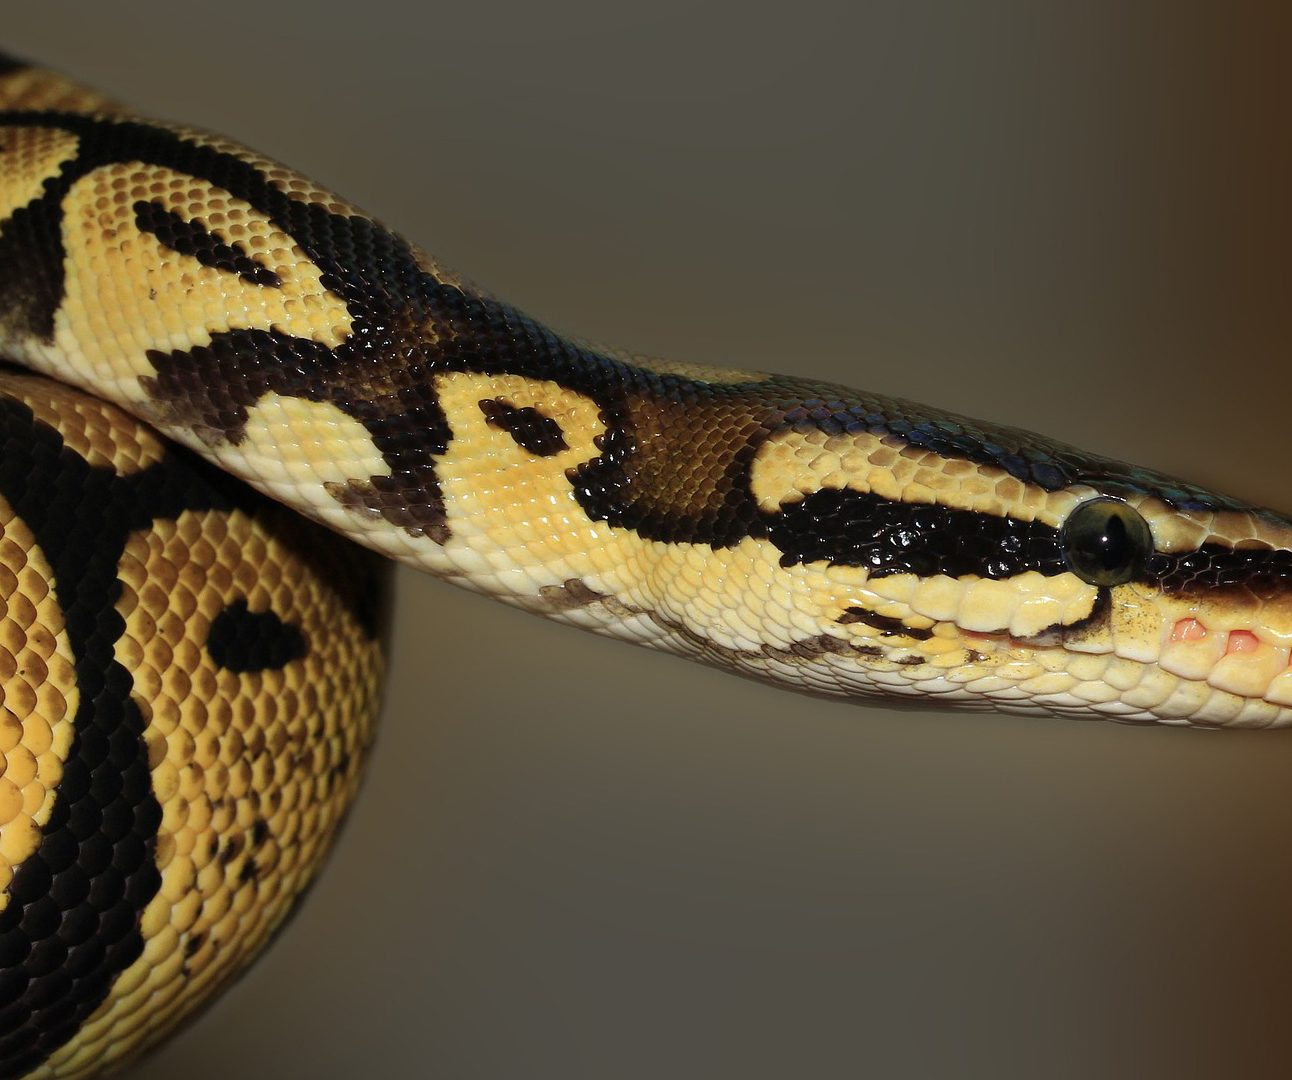 Close of of the head of a snake with yellow and black markings